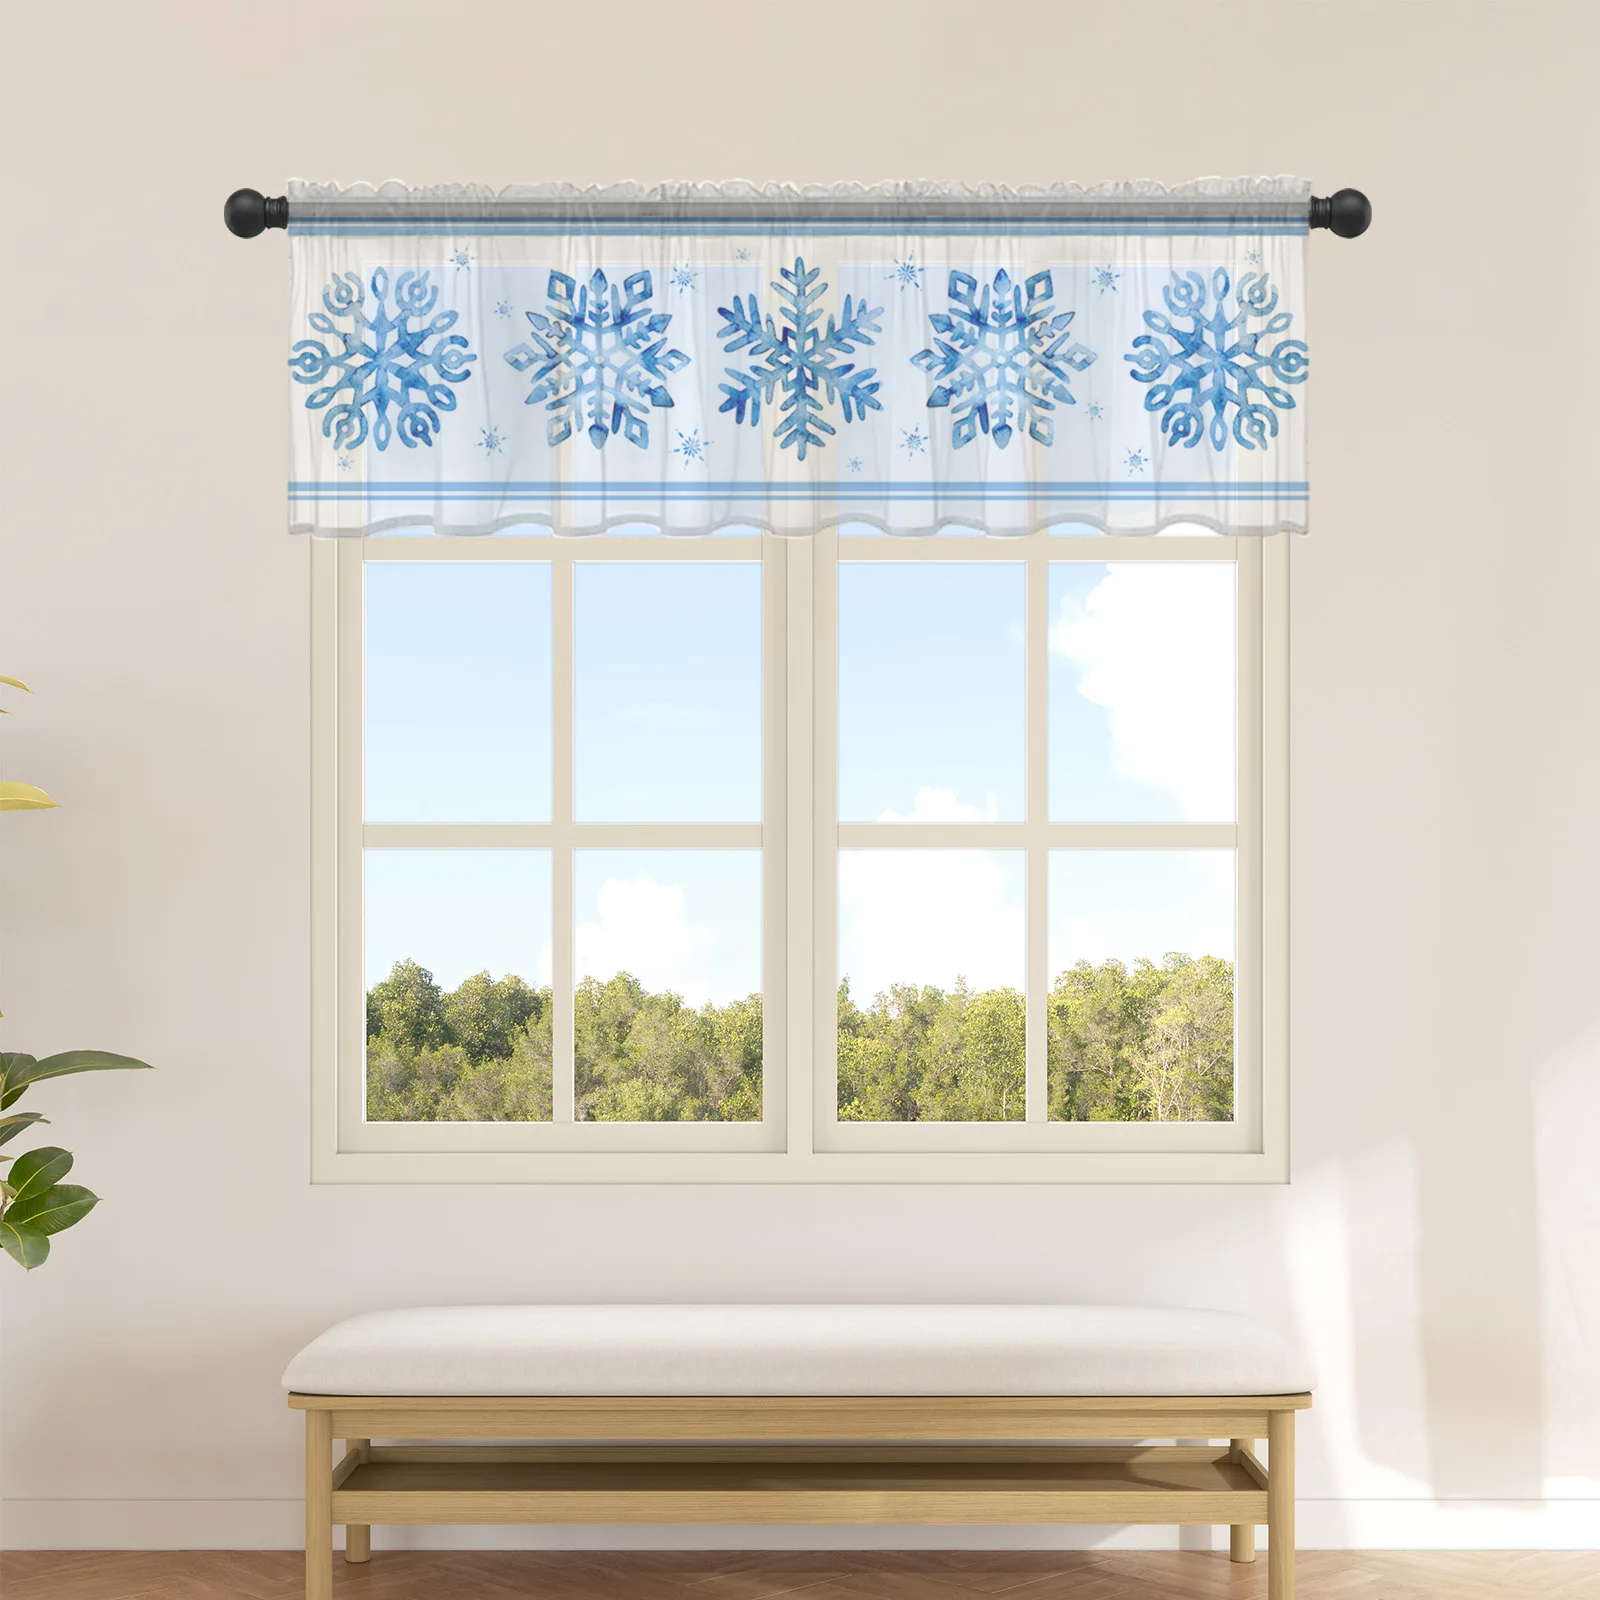 

Christmas Blue Snowflakes Short Tulle Curtains for Kitchen Cafe Sheer Voile Half-Curtain for Bedroom Doorway